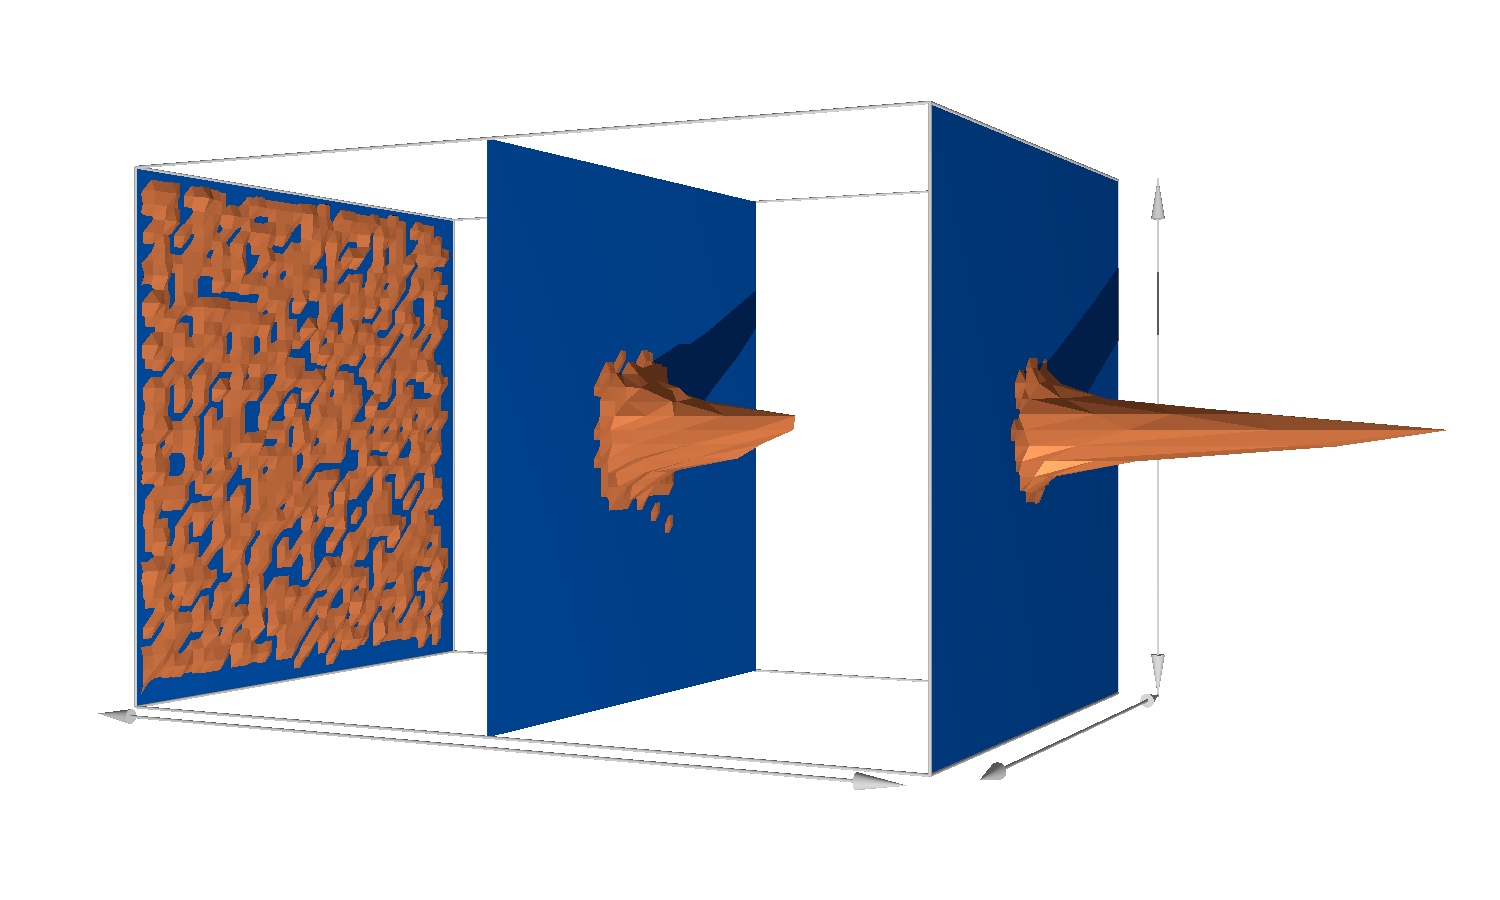 Image showing results of simulations